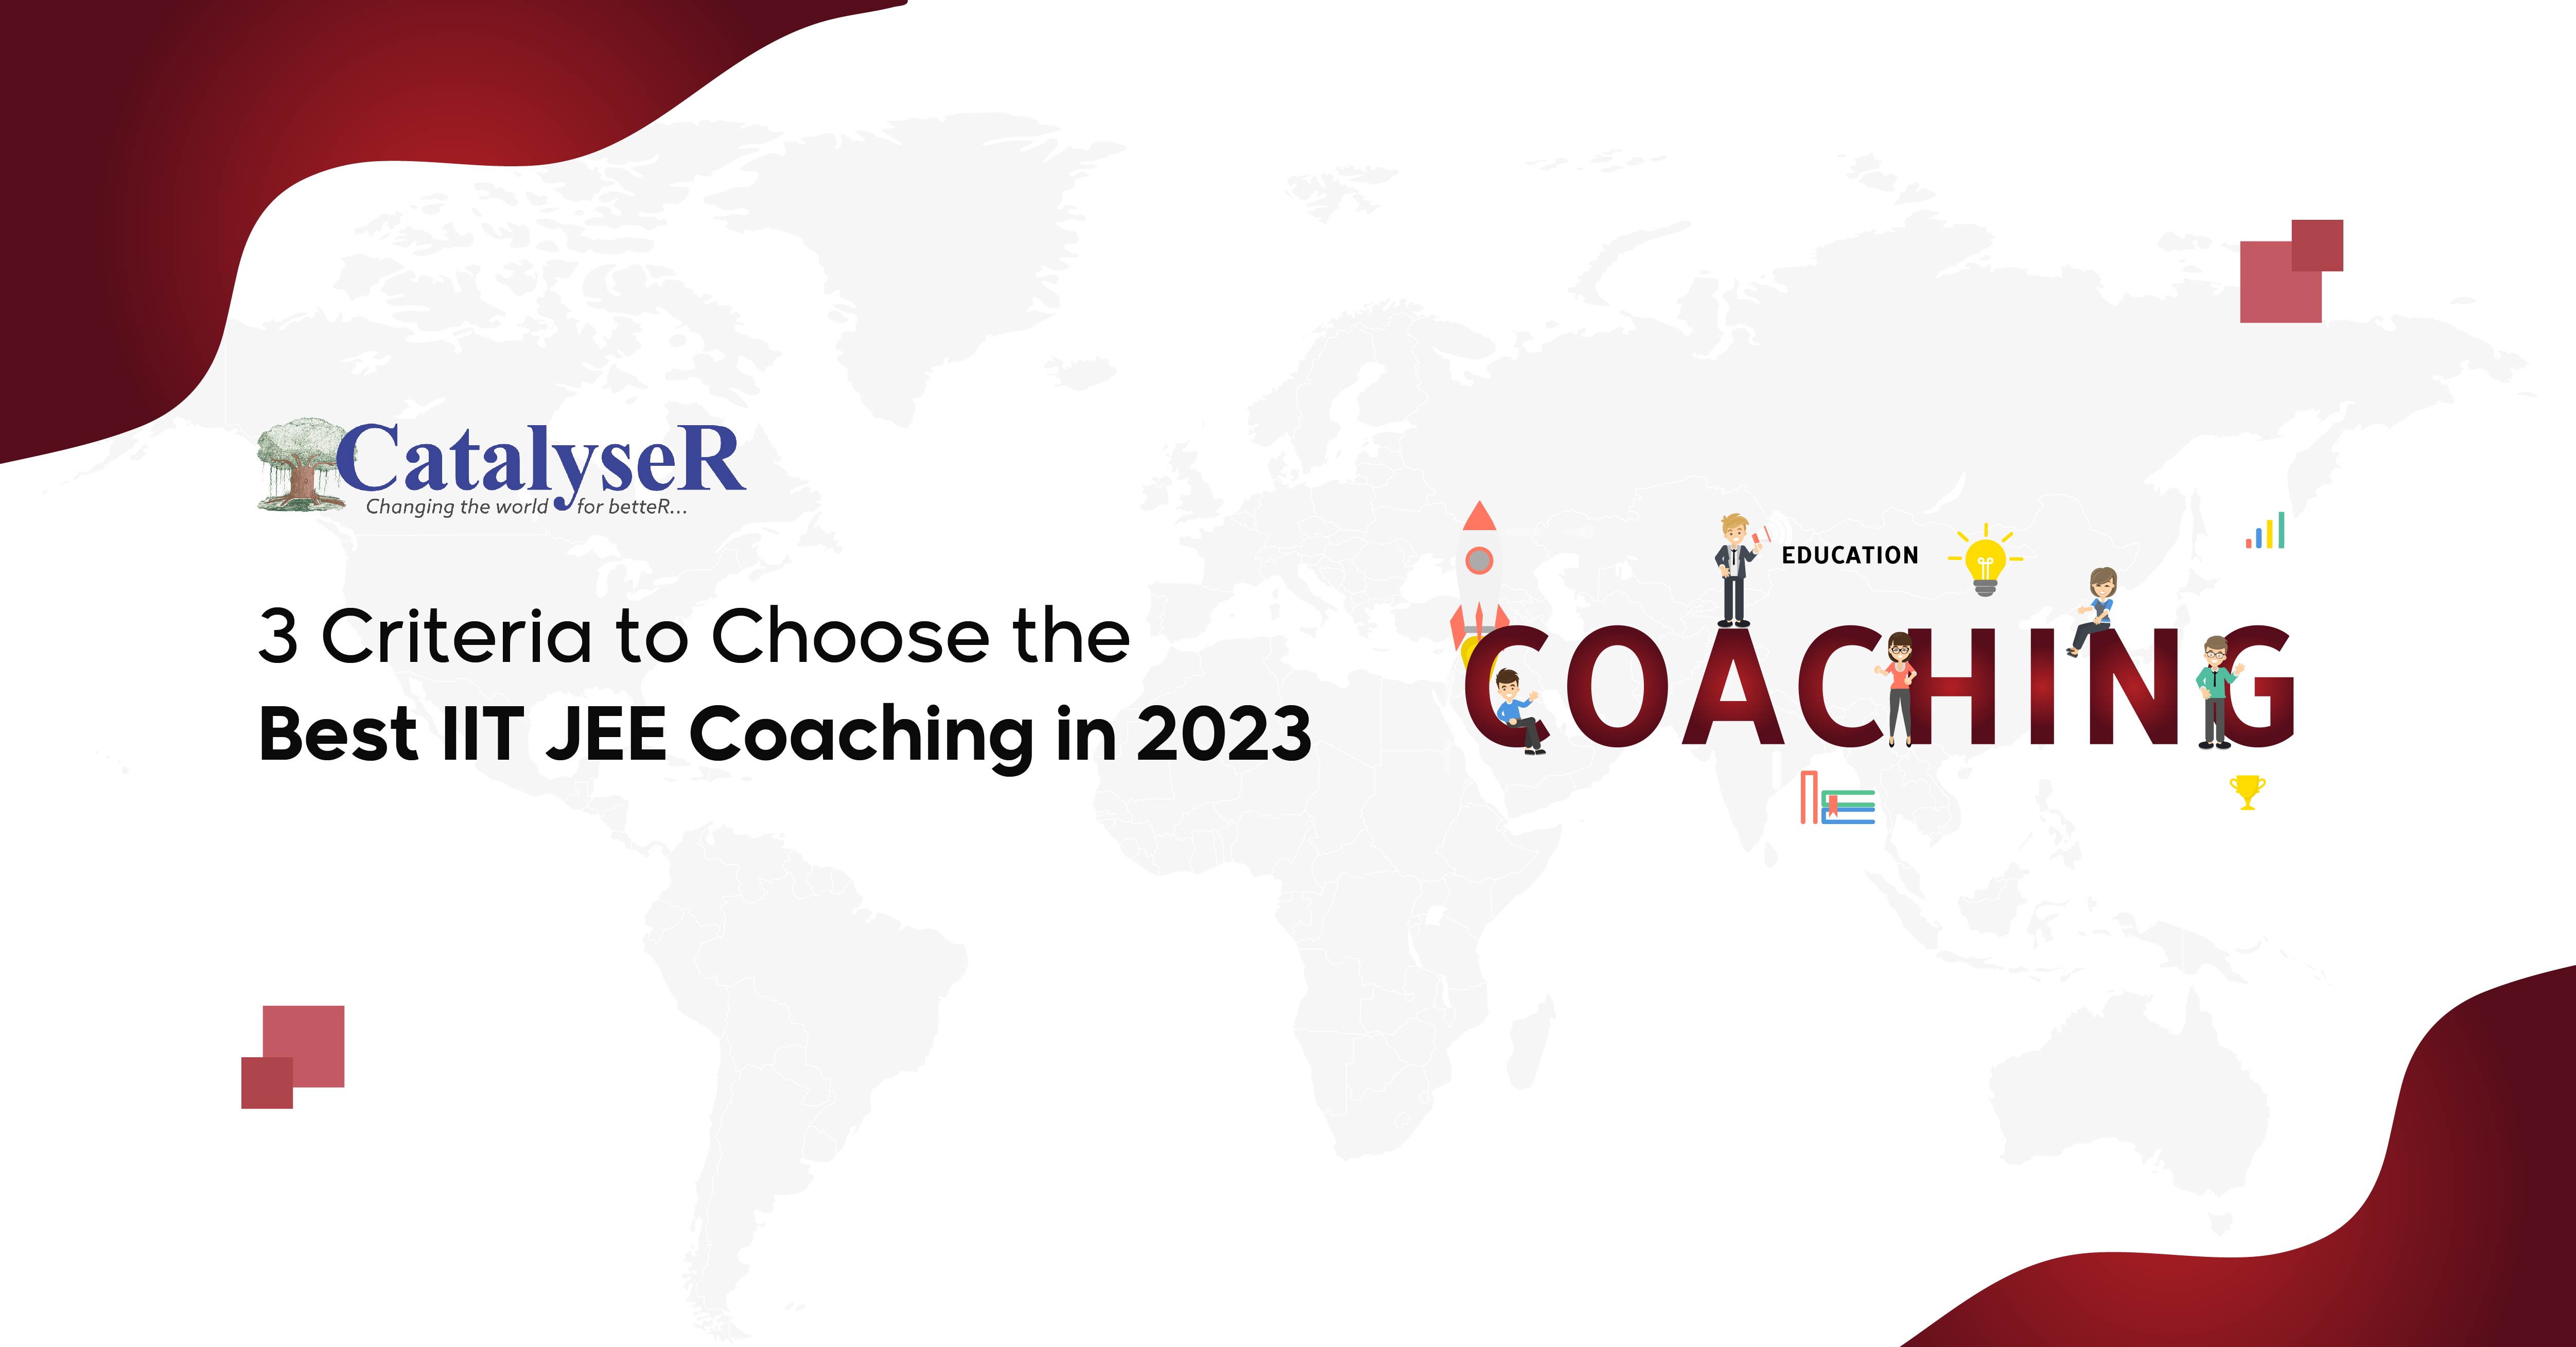 3 Criteria to Choose the Best IIT JEE Coaching in 2023